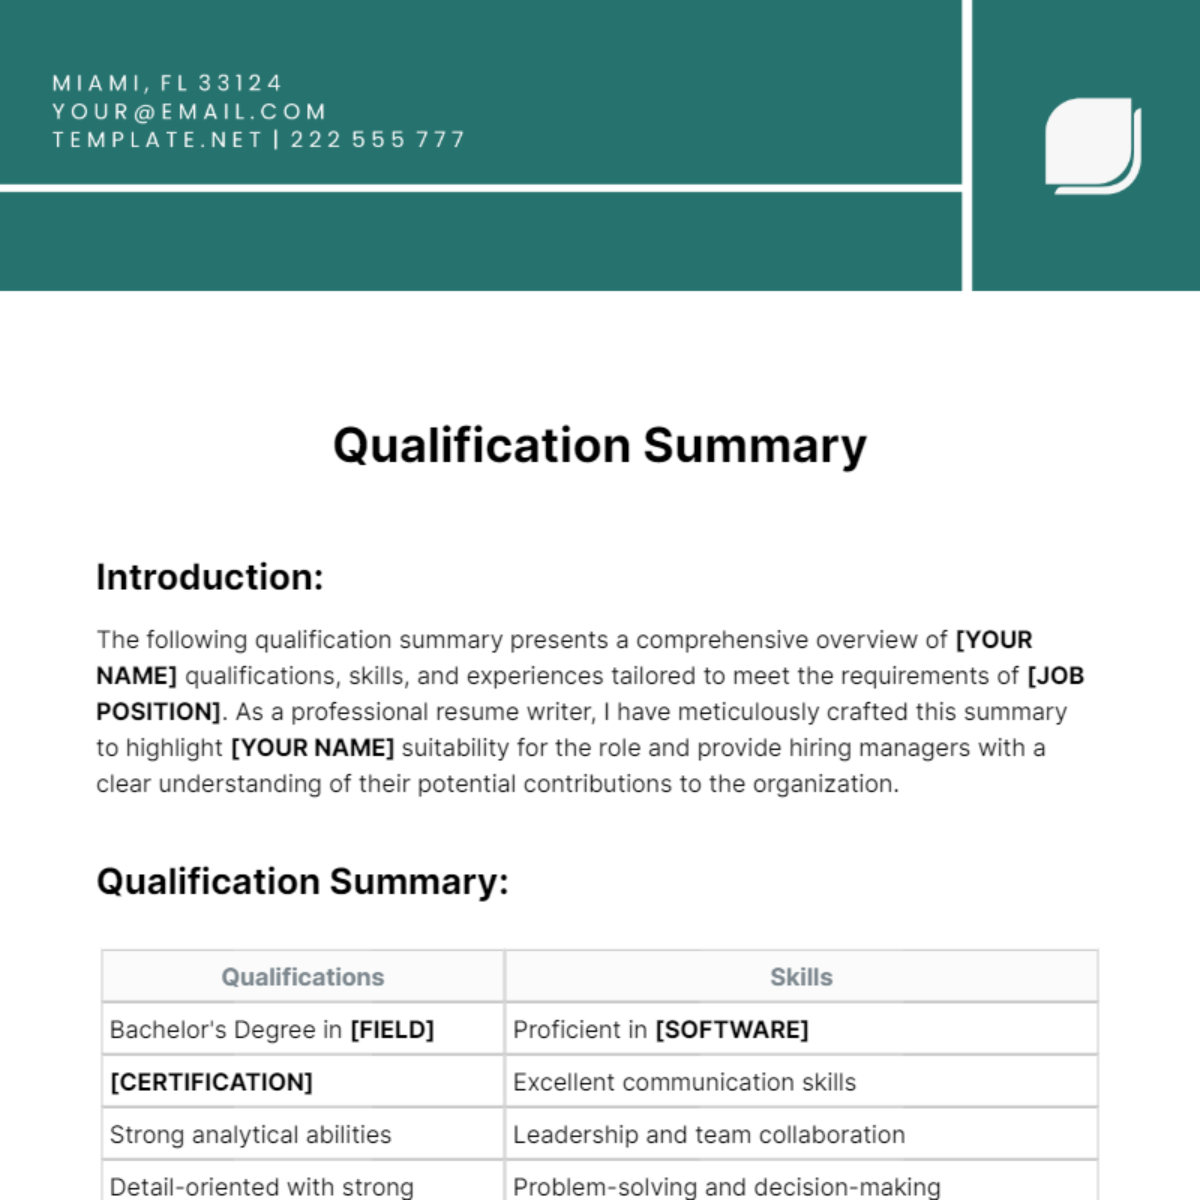 Qualification Summary Template